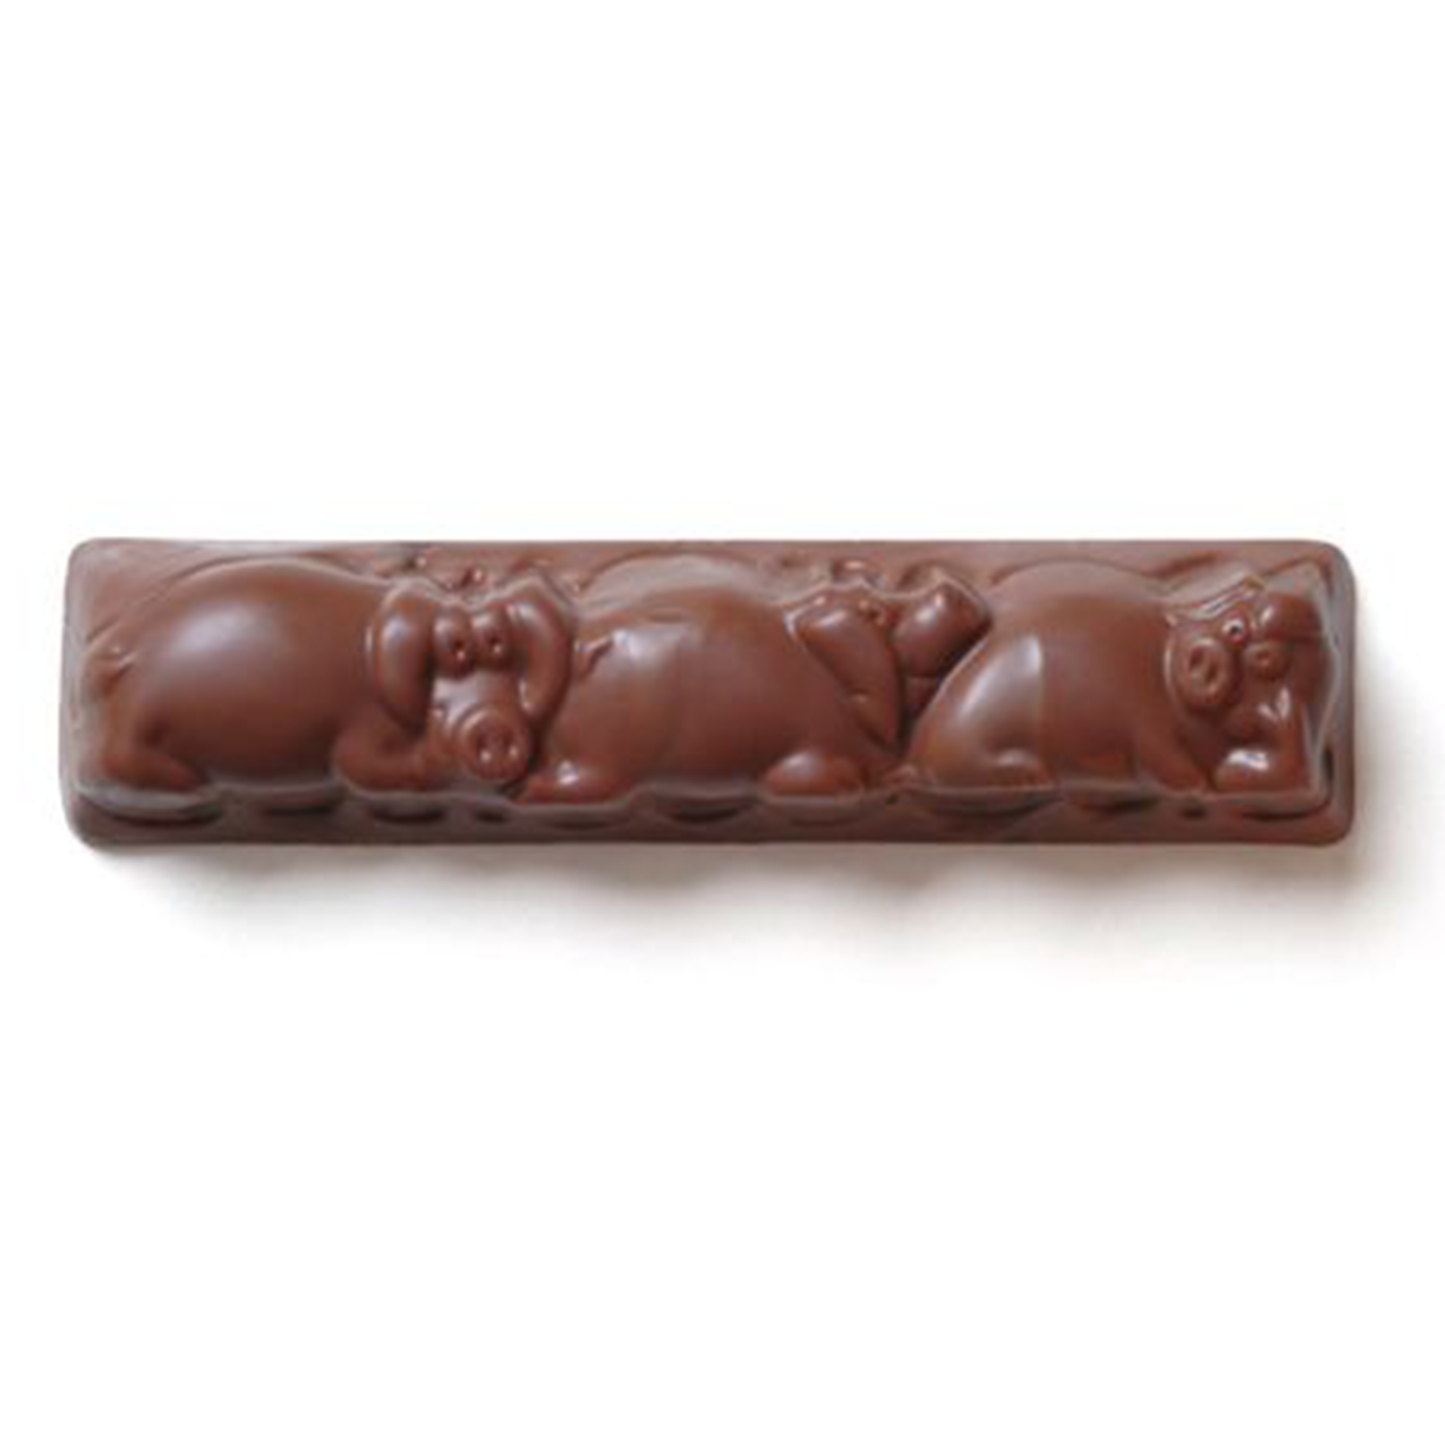 Truffle Pig 47% Cacao Milk Chocolate Bar with Peanut Butter